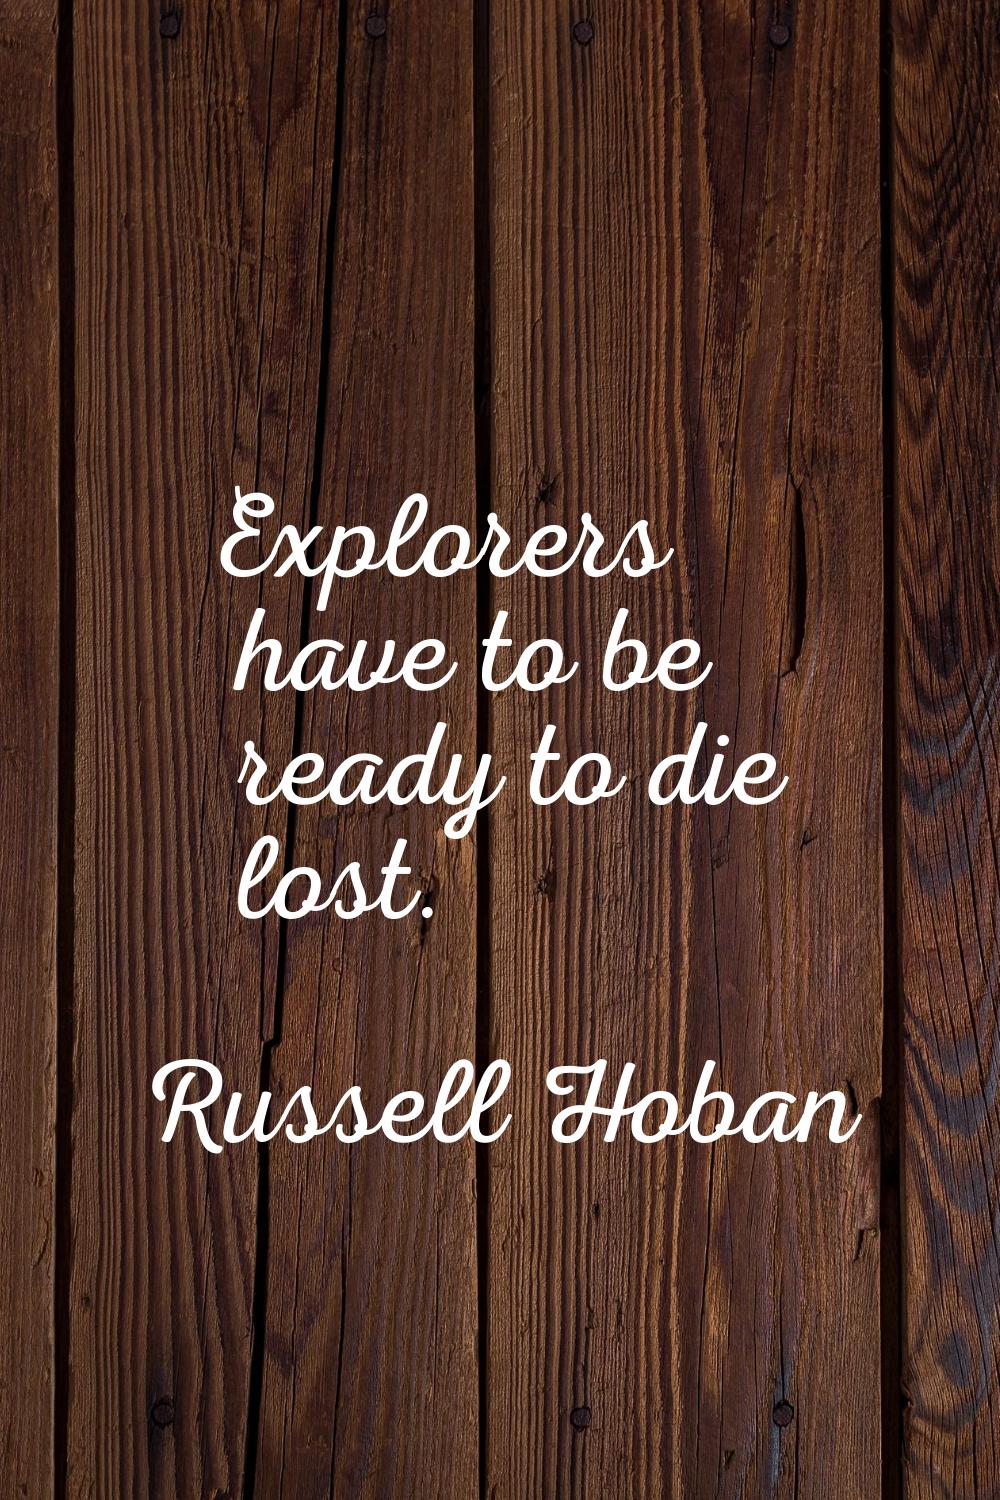 Explorers have to be ready to die lost.